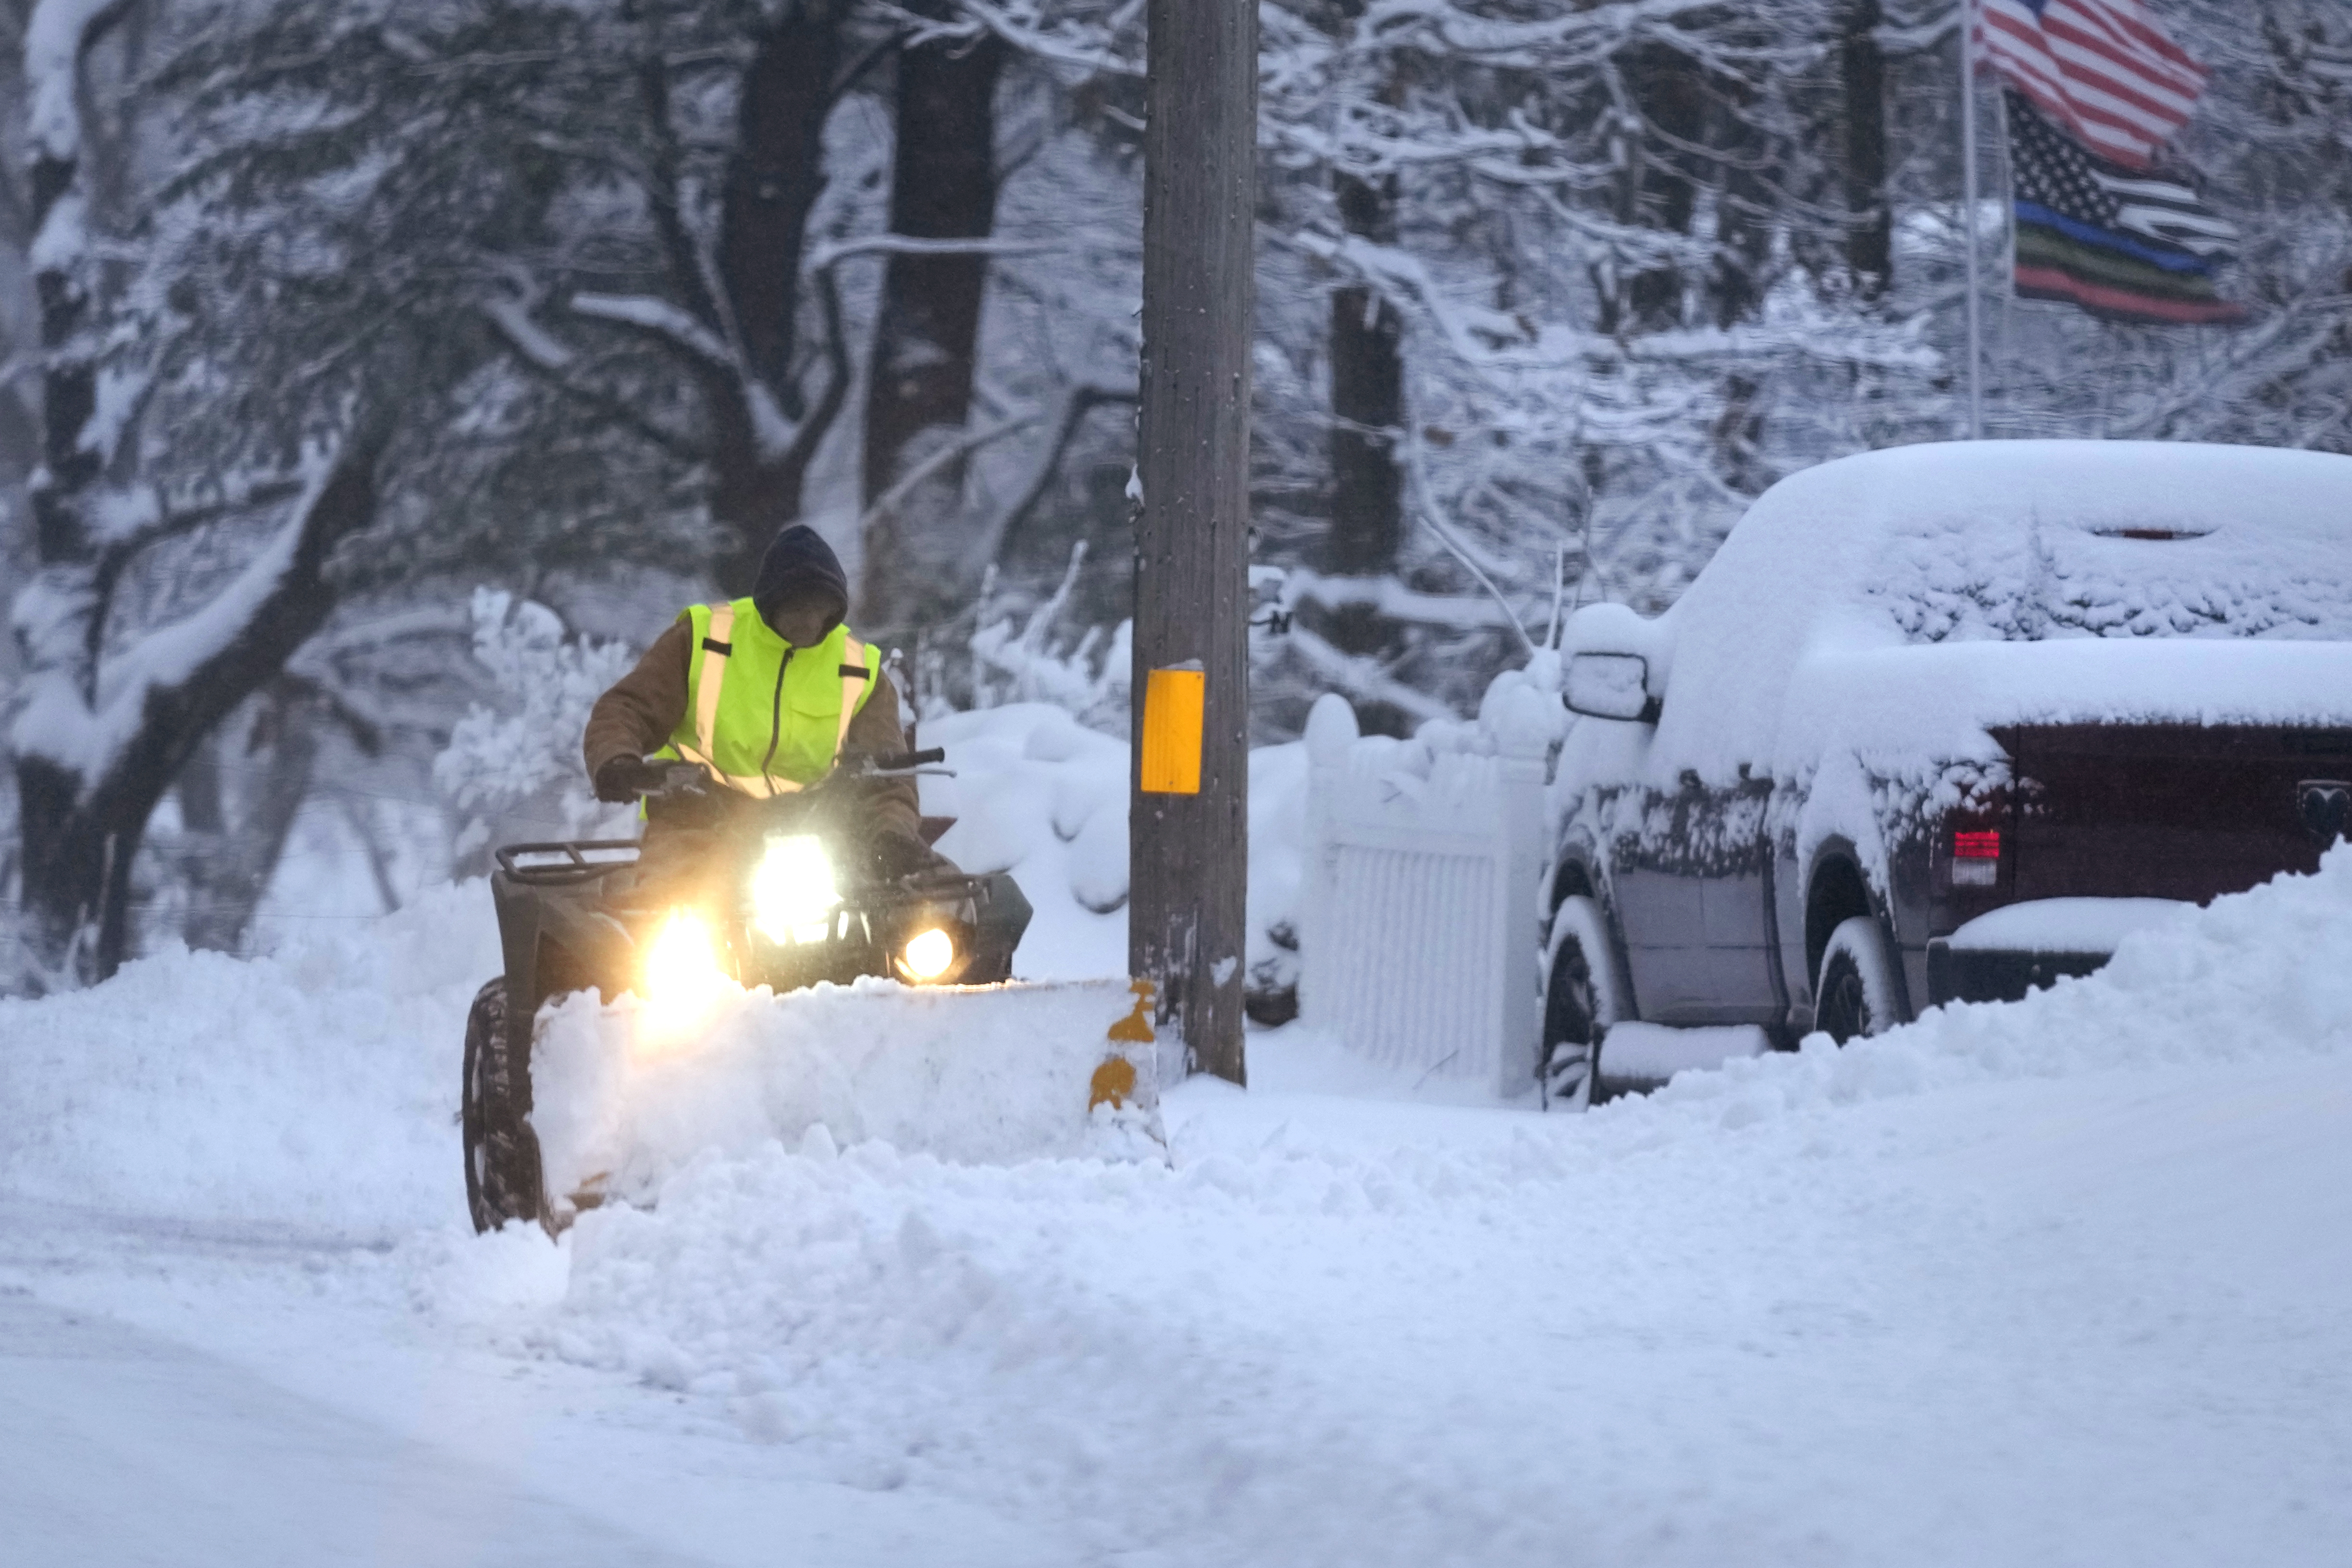 Winter Storm Brings Heavy Snow to Parts of Northeast - The New